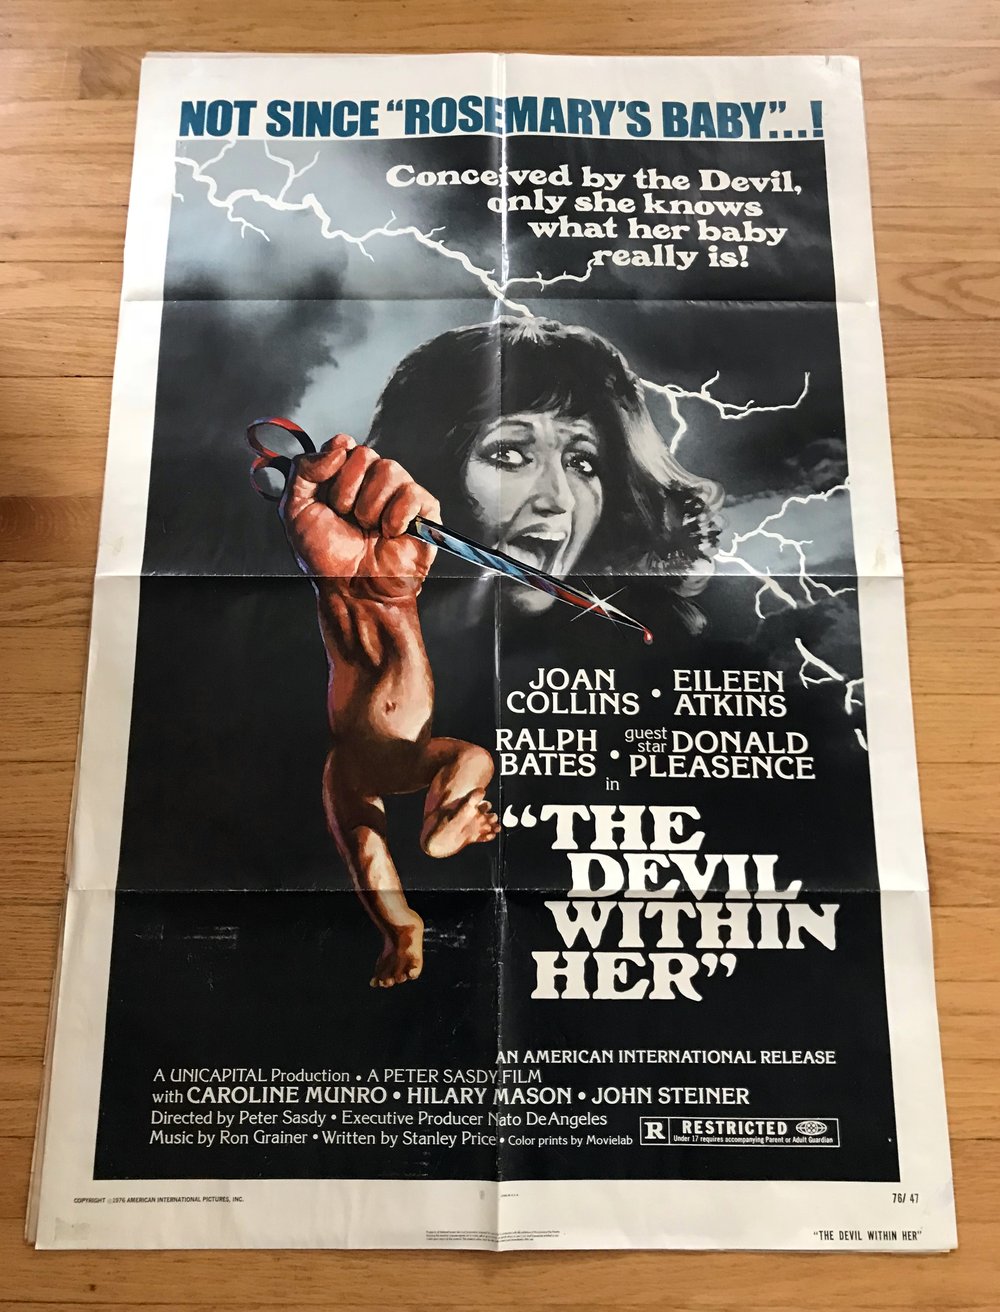 1975 THE DEVIL WITHIN HER Original U.S. One Sheet Movie Poster